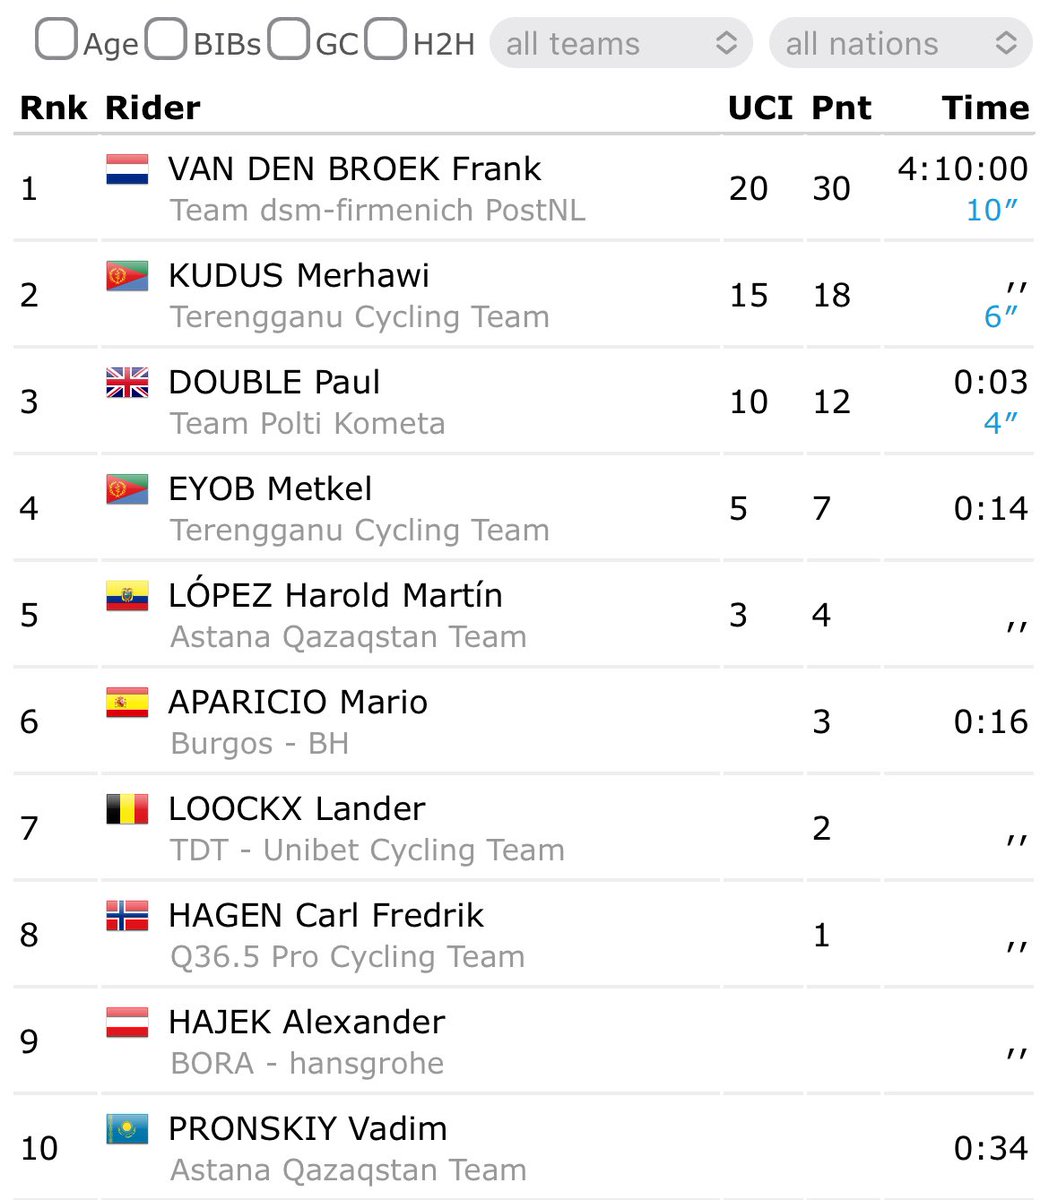 Brilliant day at the @tourofturkiye today for the Eritrean 🇪🇷 contingent @MeraKudus on @TSG_cyclingteam takes second on the stage, and moved to second in the GC (+0.04) and @Metkel_eyob takes 4th and moves up 14 places in the GC to #4 👏👏 #EritreanCycling #AfricaRising 💻…